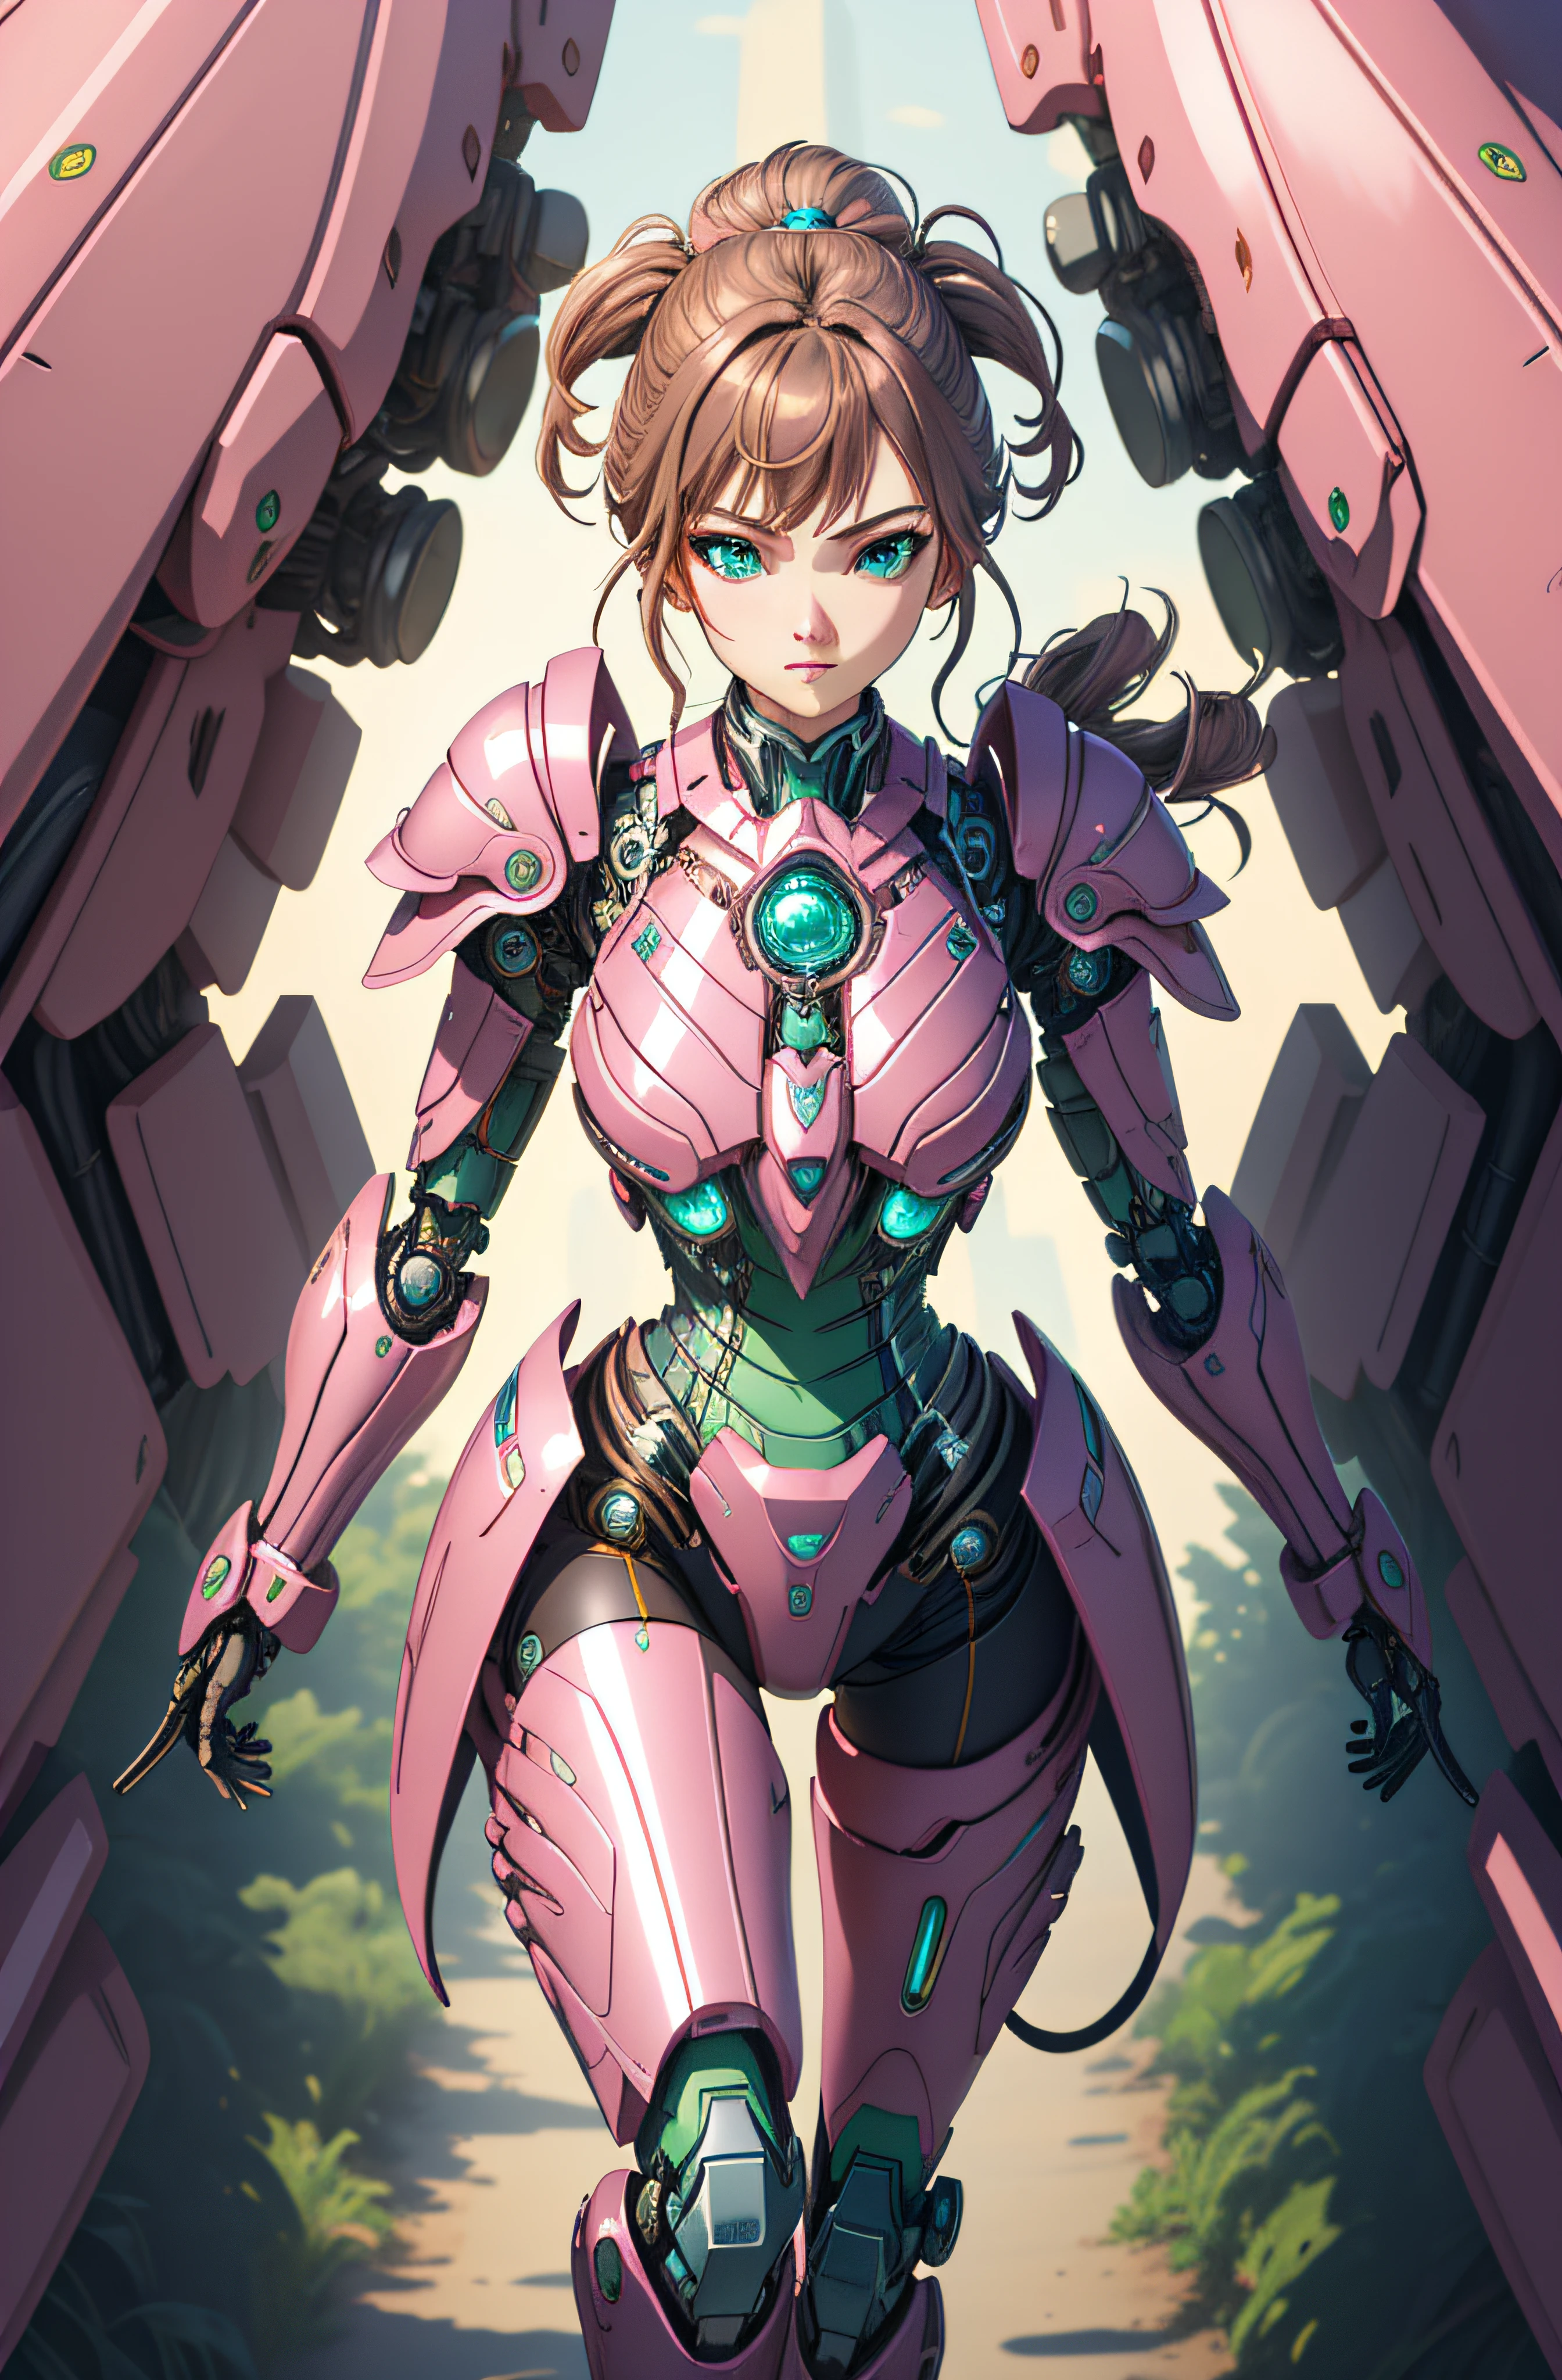 (Super elaborate CG Unity 8K wallpaper, masterpiece, highest quality): (Dynamic Angle, Solo, 1 beautiful Girl, Pink cyborg armor in the style of police uniform, sparkly green eyes, brown hair)